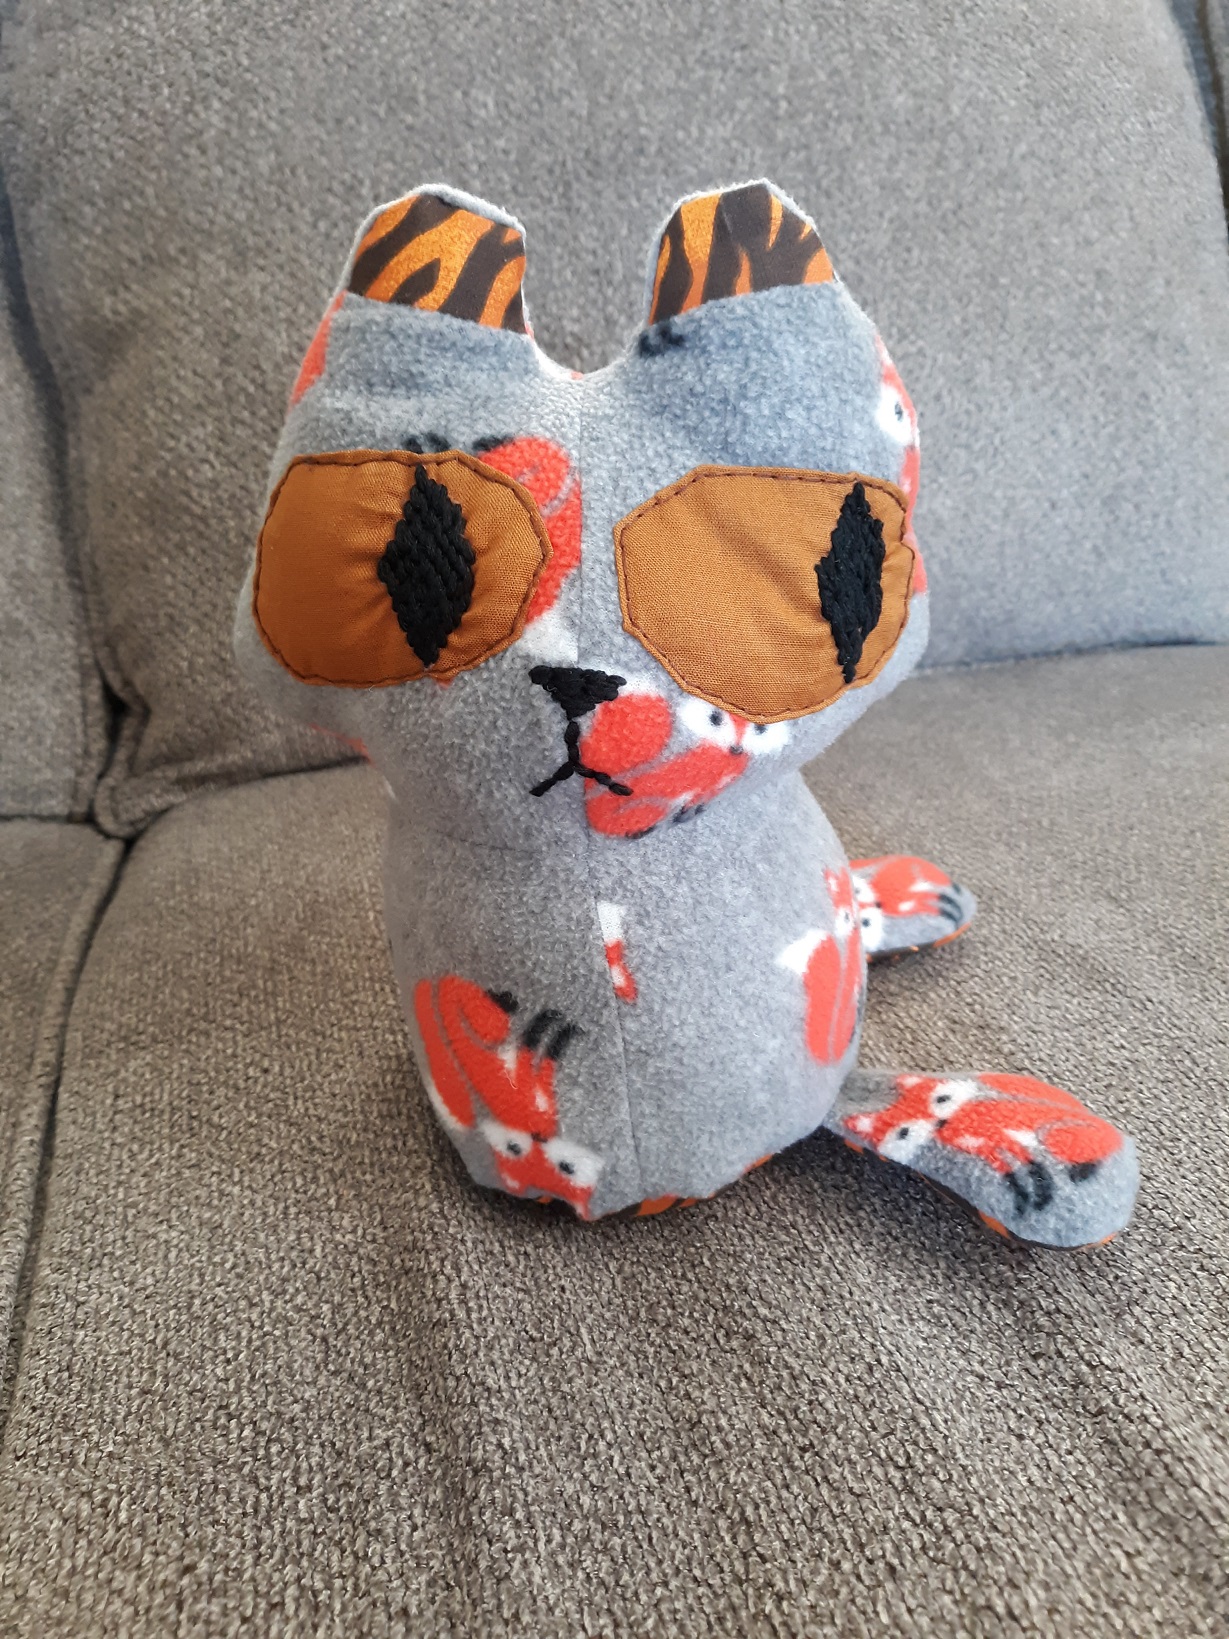 A doll that looks somewhat of a cat. Their body is made of a grey fabric that has orange foxes on it. The inside of the ears are of a tiger print. The eyes are large and brown with black diamond shaped pupils that were embroidered on. The mouth and nose were also embroidered on. The doll has two legs that are sewn on the side of the body. The bottom of the body and the bottom of the legs have a tiger pattern on them.